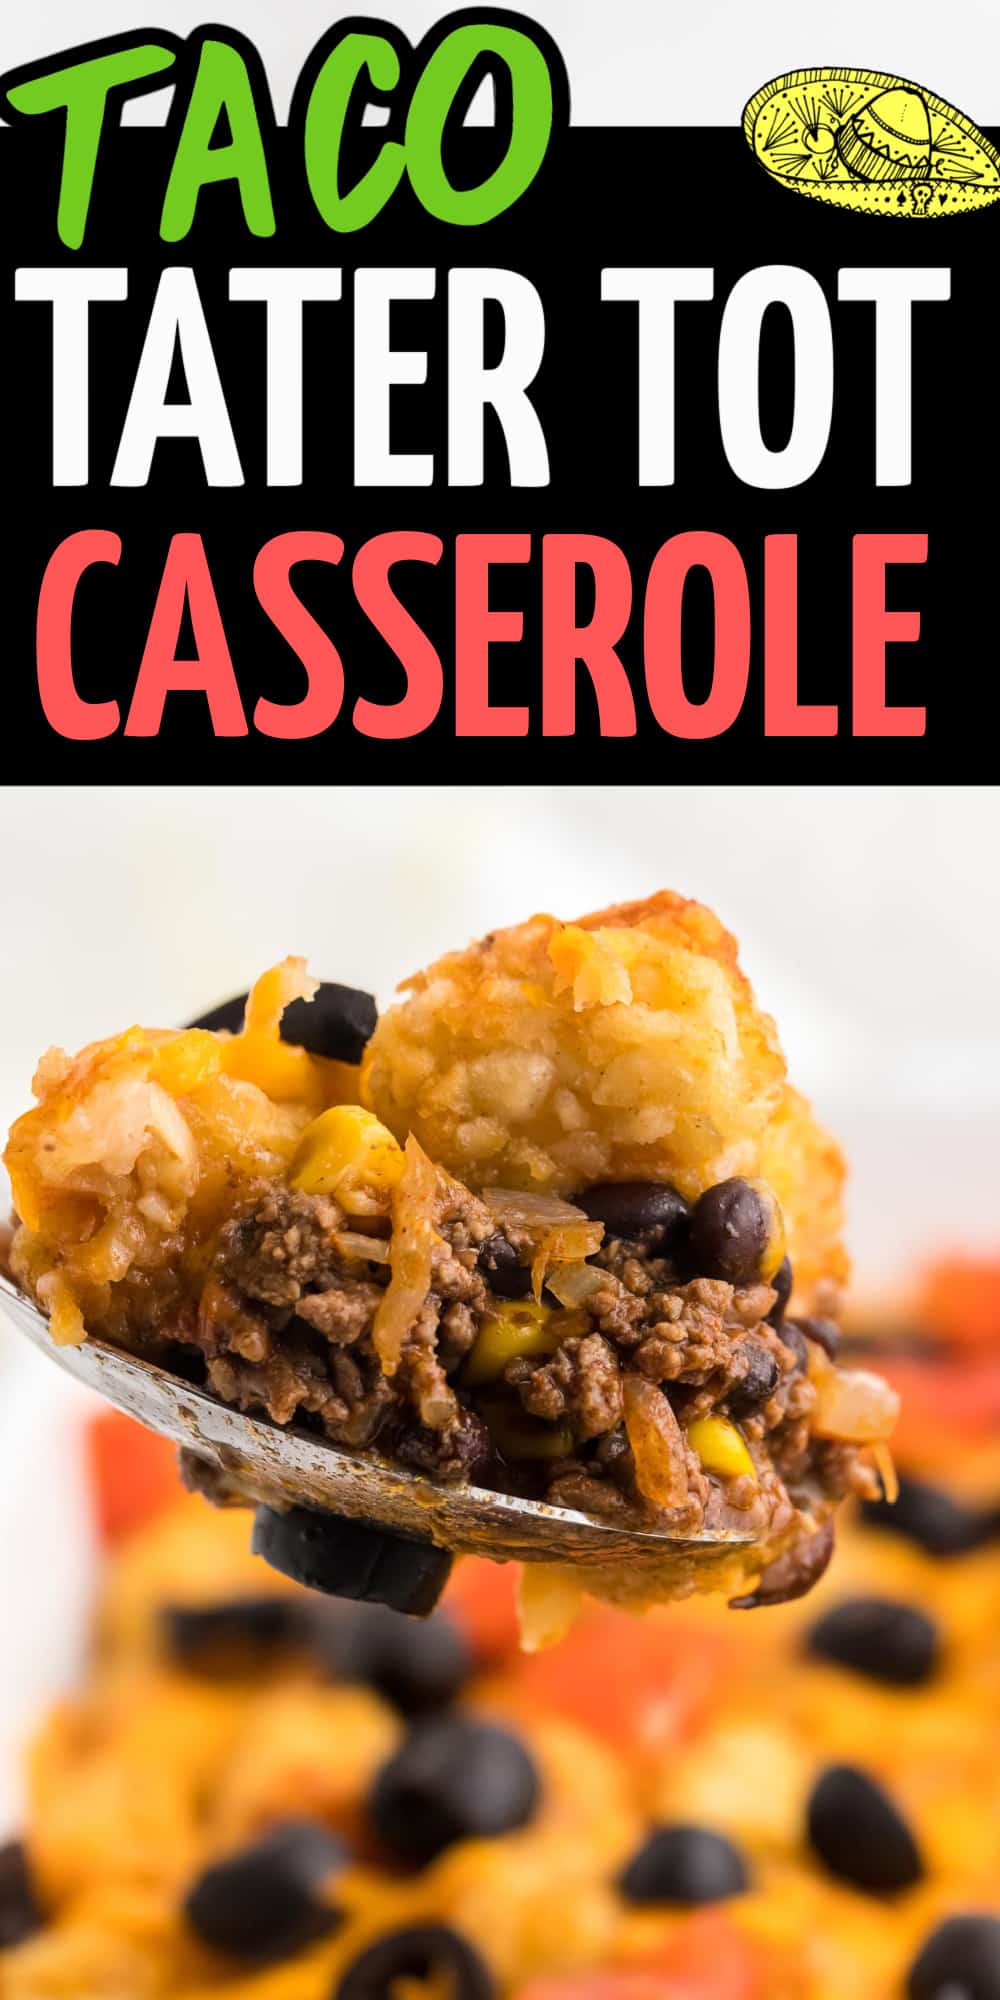 This Taco Tater Tot Casserole combines ground beef, with classic Mexican spices, and is topped with yummy cheese. Perfect for all year long, but especially for Cinco De Mayo. Simple Taco Tater Tot Casserole Recipe | Oven Baked Tater Tot Beef Casserole #cheerfulcook #casserole #beef #recipe #tatertot via @cheerfulcook